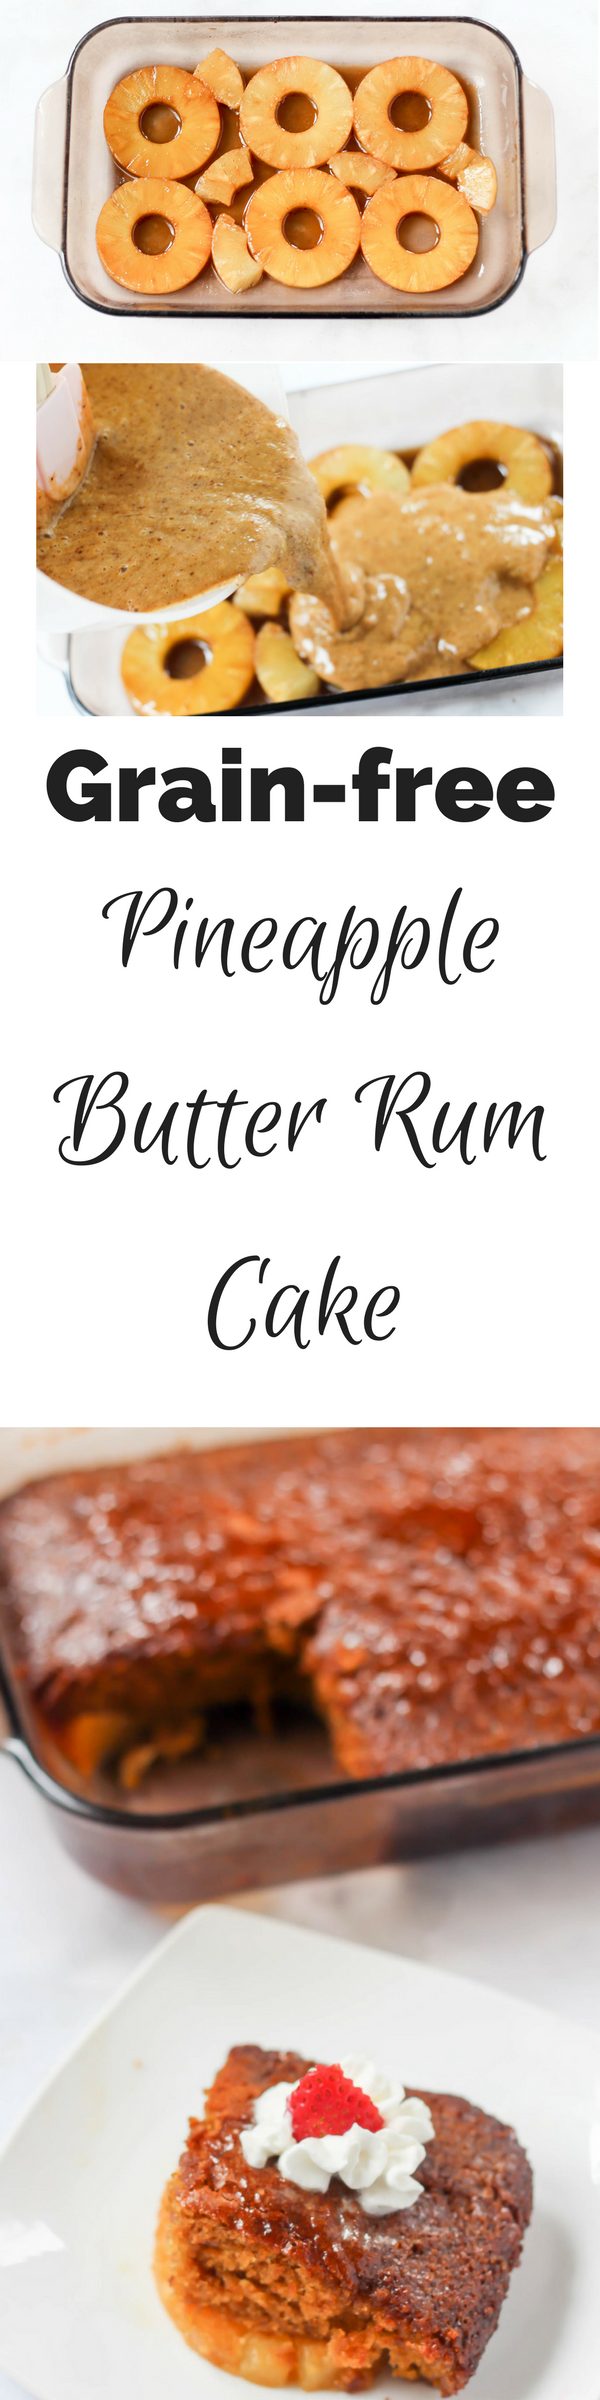 Grain free pineapple butter rum cake made with no refined sugar. This is the spring dessert you've been looking for! | fitnessista.com | #pineapplecake #grainfreedessert #easterdessert #springdessert #pineapplebutterrumcake